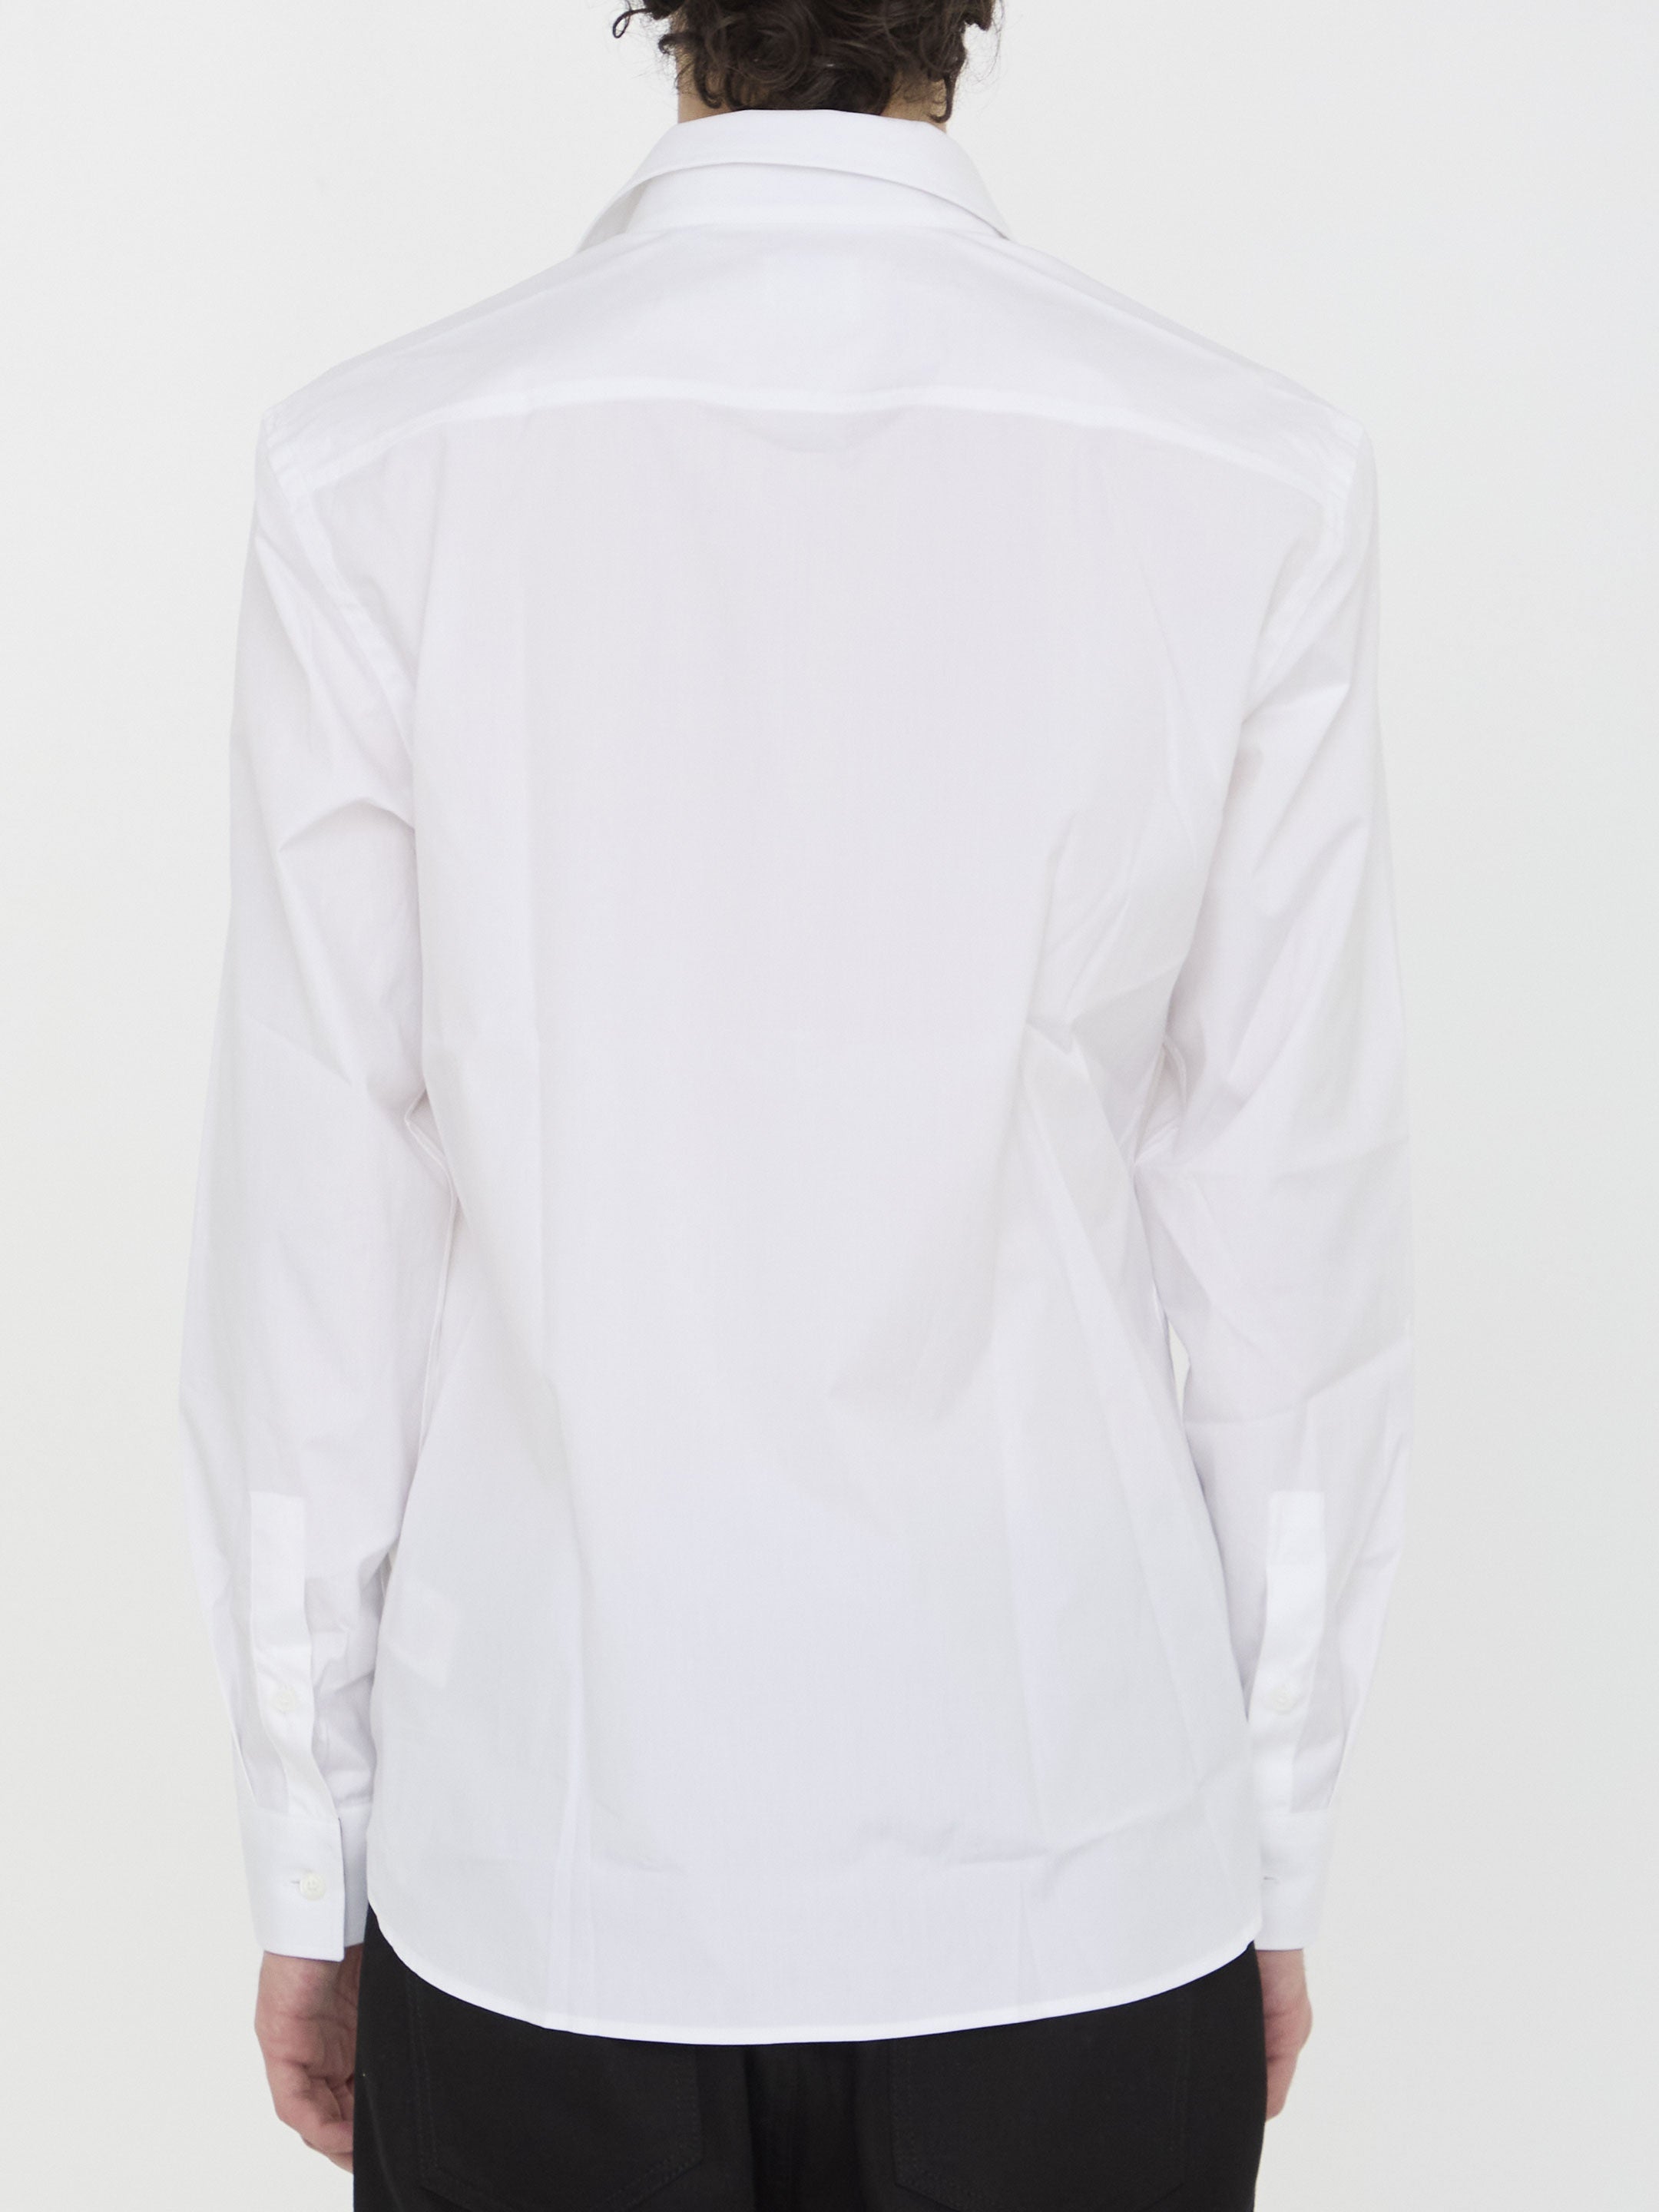 BURBERRY-OUTLET-SALE-Stretch-cotton-shirt-Shirts-M-WHITE-ARCHIVE-COLLECTION-4.jpg